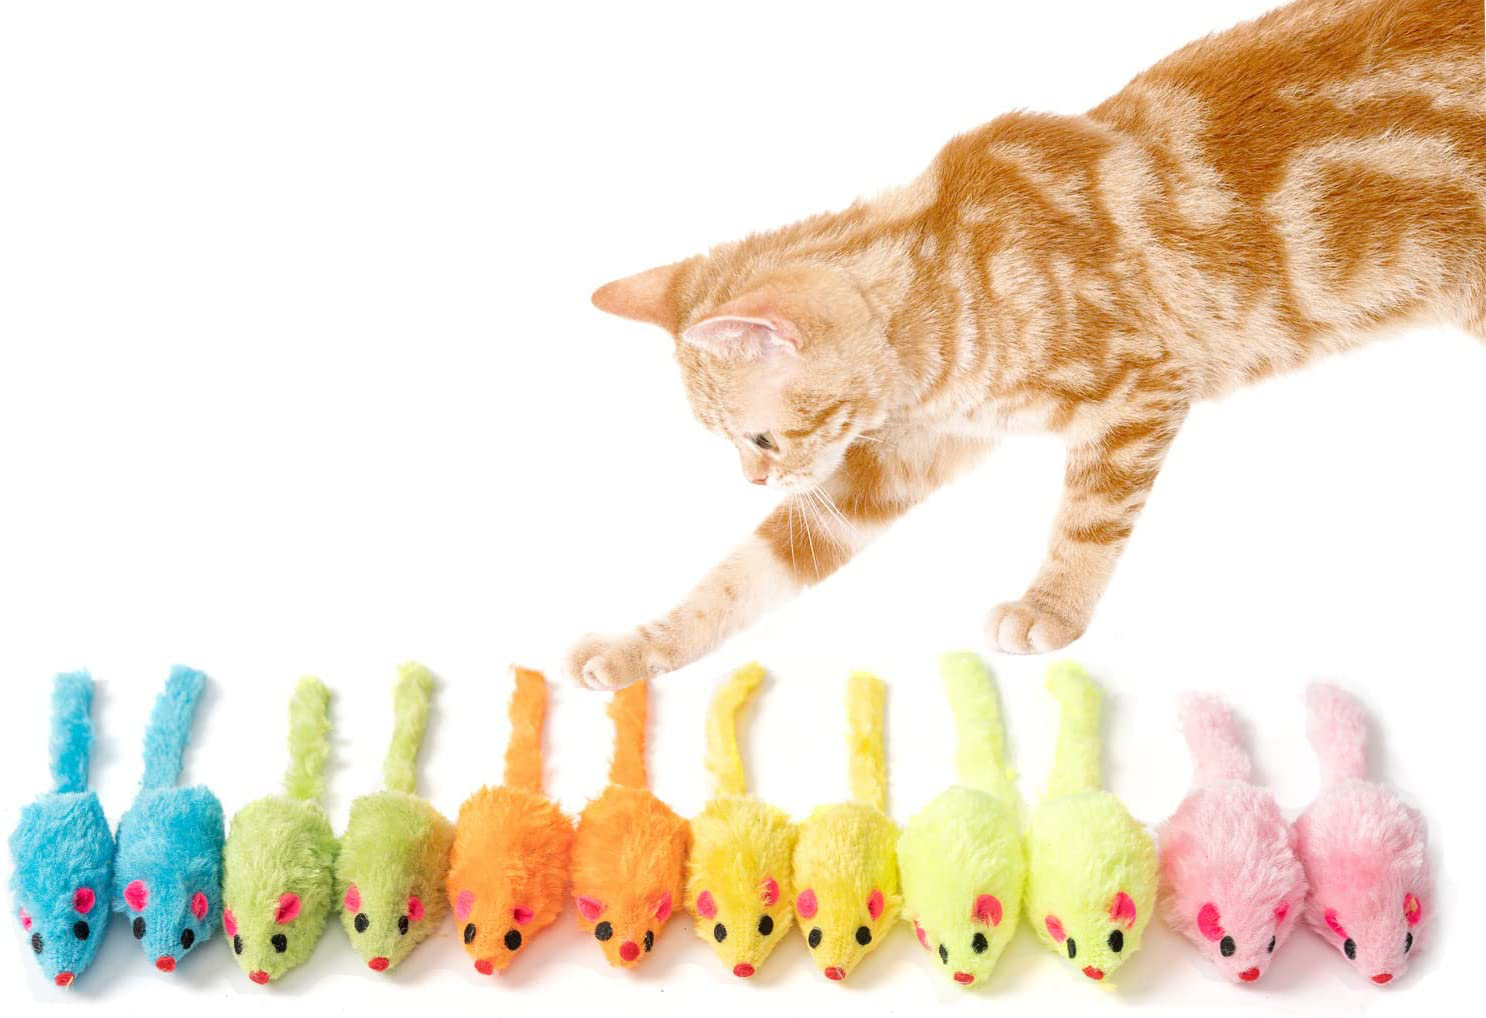 Meohui Fur Mice Cat Toys, Rattling Catnip Cat Toys Mice, 5.5” Real Little Mice Size Cat Mouse Toys with Rattle Sound, Catnip Prefilled Cat Mice Toy for Indoor Cats Kitten Interactive Play Fetch Animals & Pet Supplies > Pet Supplies > Cat Supplies > Cat Toys MeoHui 12PCS  